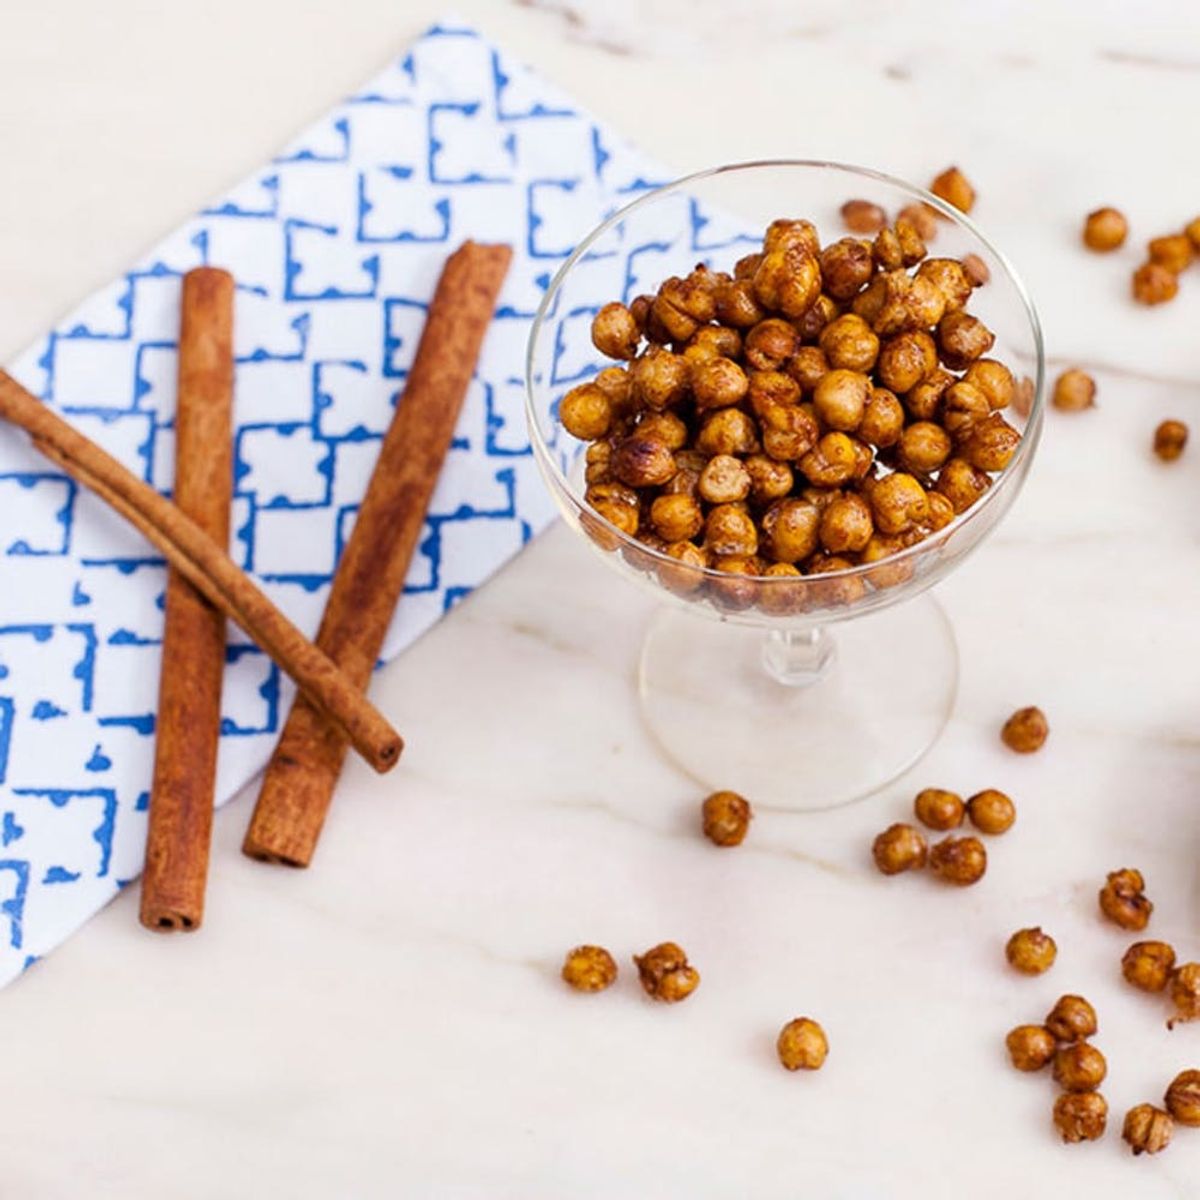 Start Your New Year Snacking With This Protein-Packed Roasted Chickpea Recipe